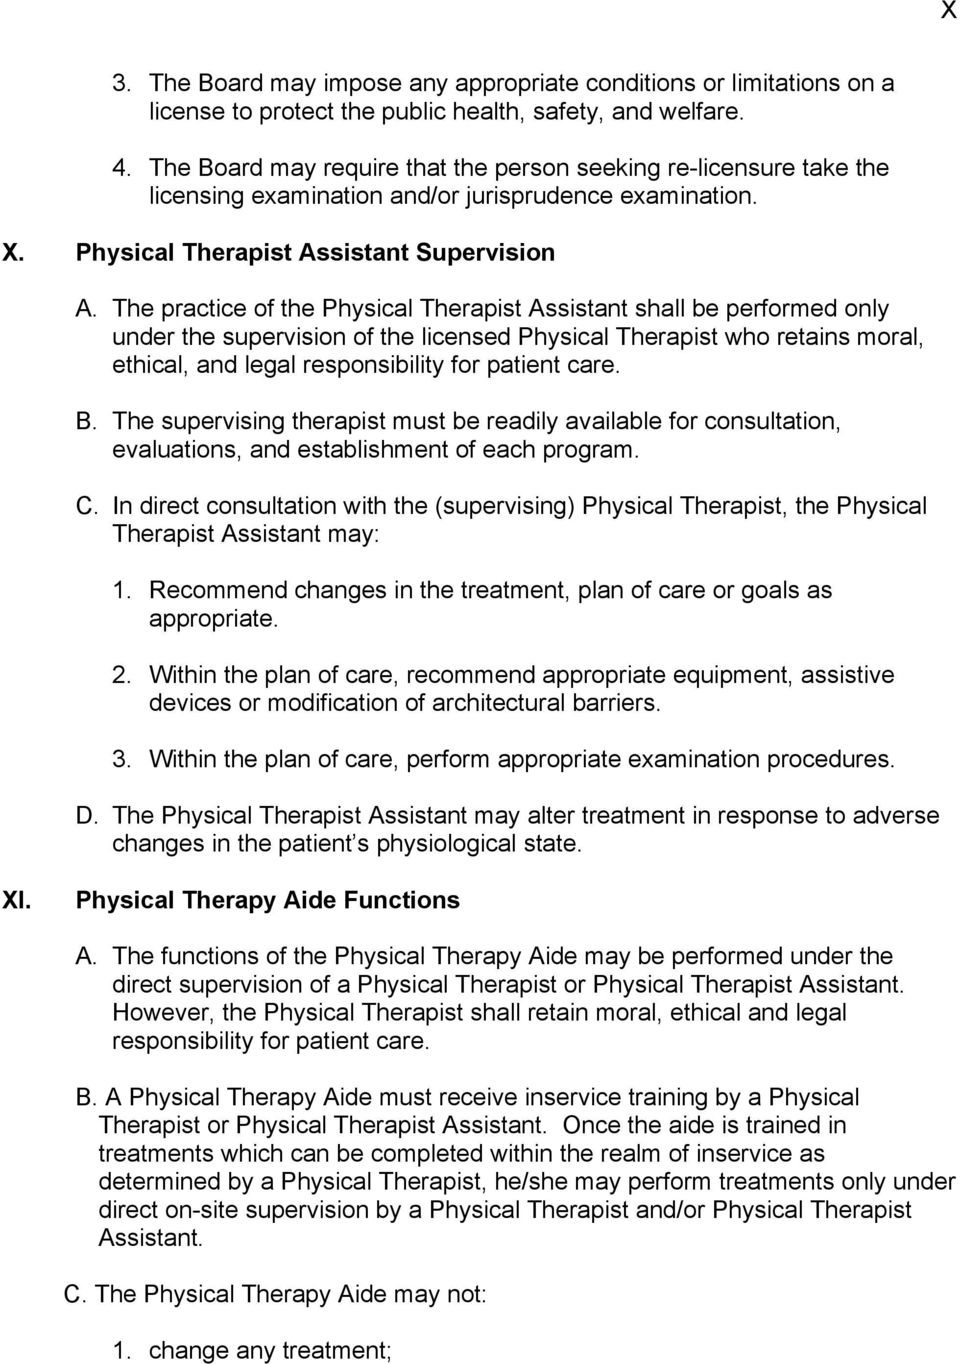 The practice of the Physical Therapist Assistant shall be performed only under the supervision of the licensed Physical Therapist who retains moral, ethical, and legal responsibility for patient care.